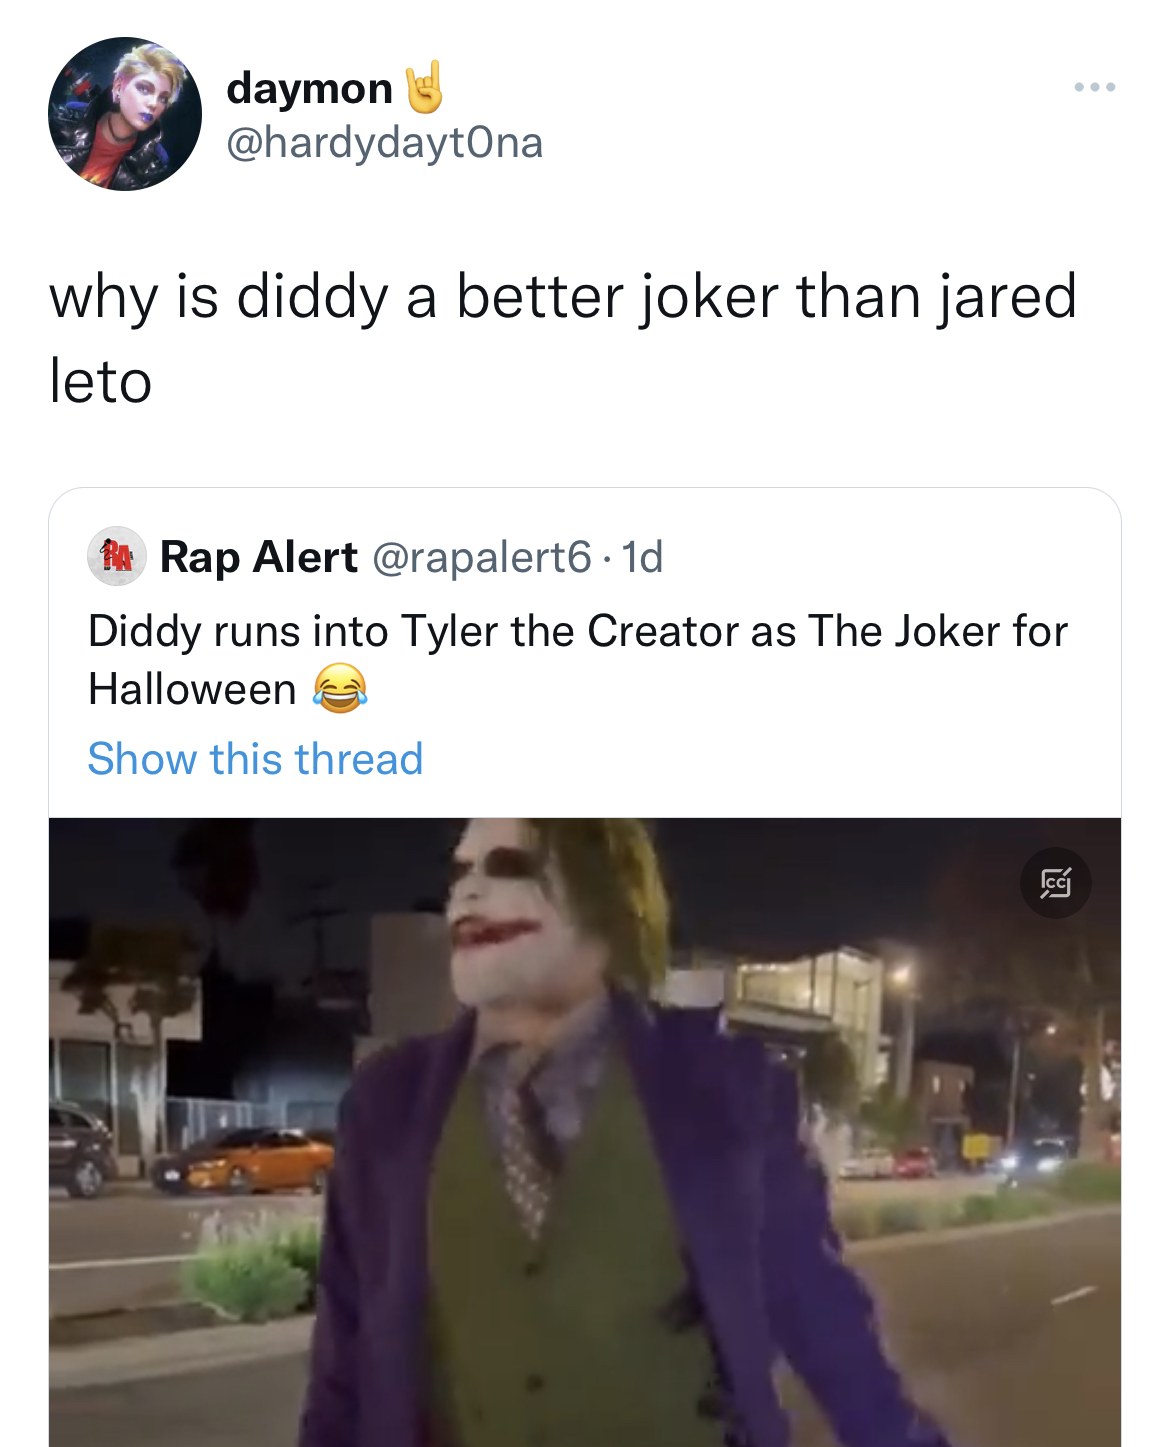 Tweets roasting celebs - media - daymon why is diddy a better joker than jared leto Rap Alert Diddy runs into Tyler the Creator as The Joker for Halloween Show this thread